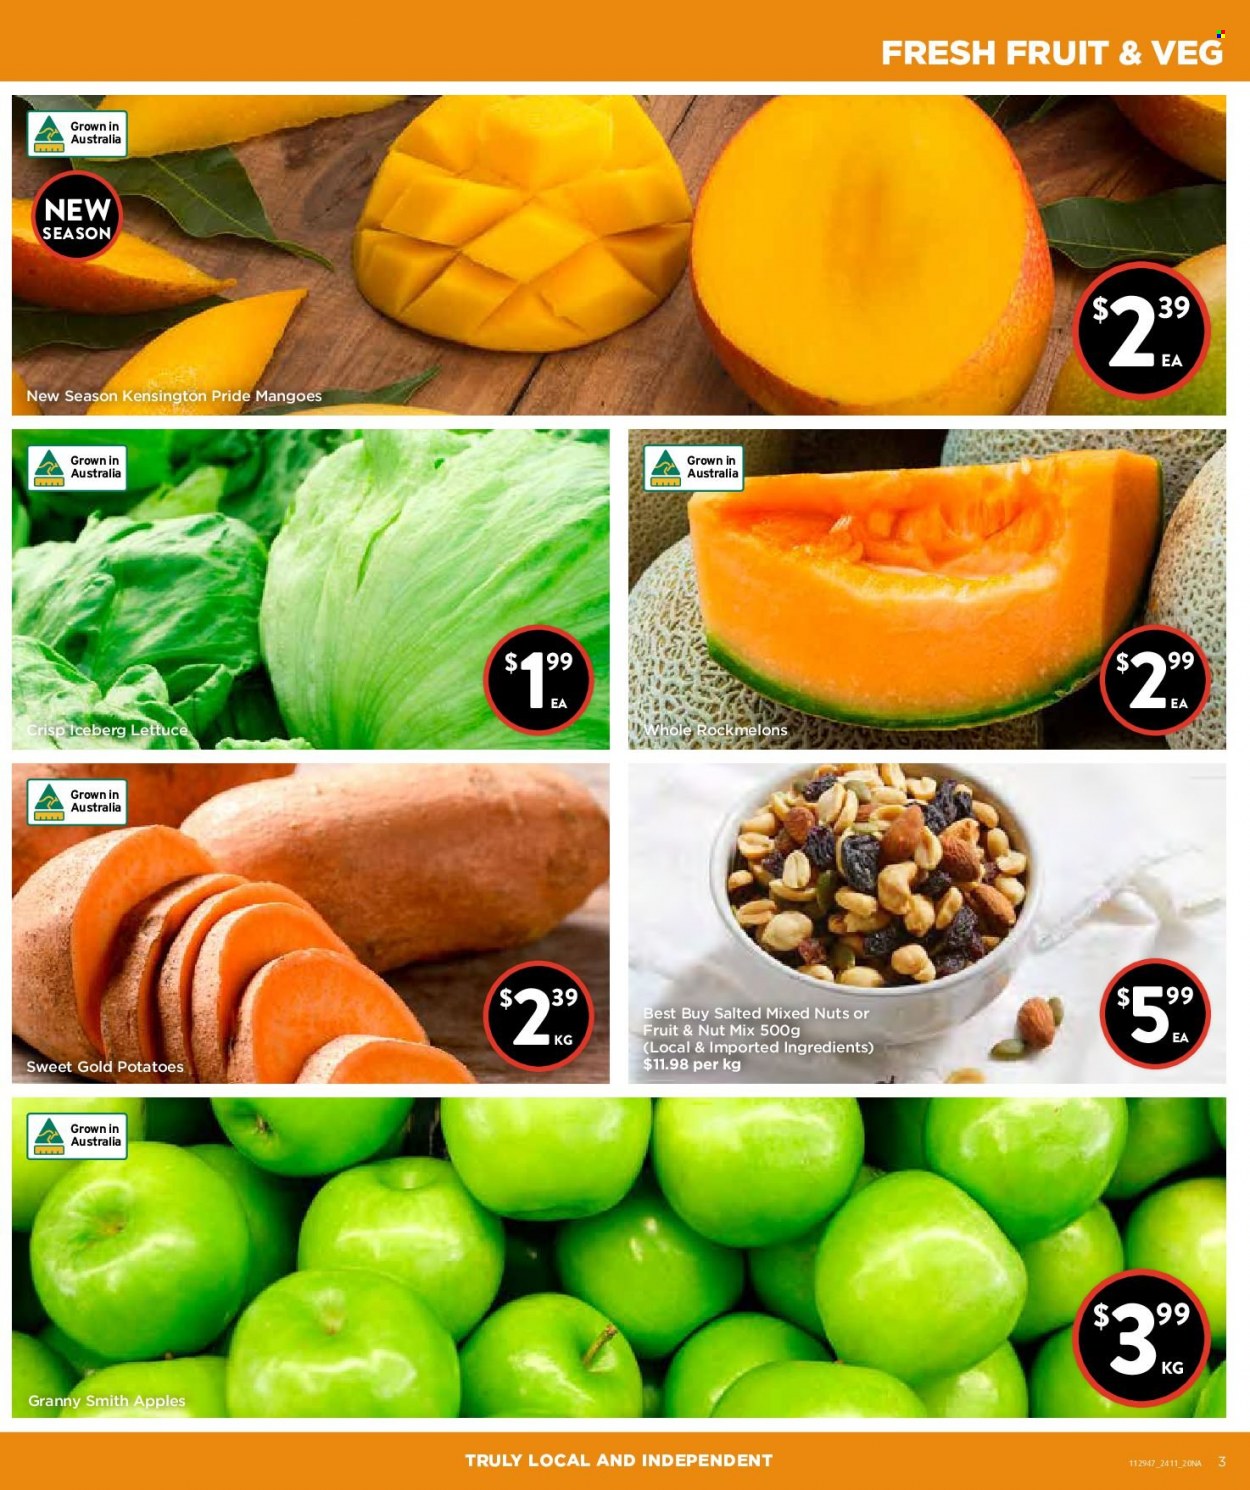 thumbnail - Foodworks Catalogue - 24 Nov 2021 - 30 Nov 2021 - Sales products - potatoes, rockmelon, apples, Granny Smith, mixed nuts, fruit & nut mix, TRULY. Page 3.